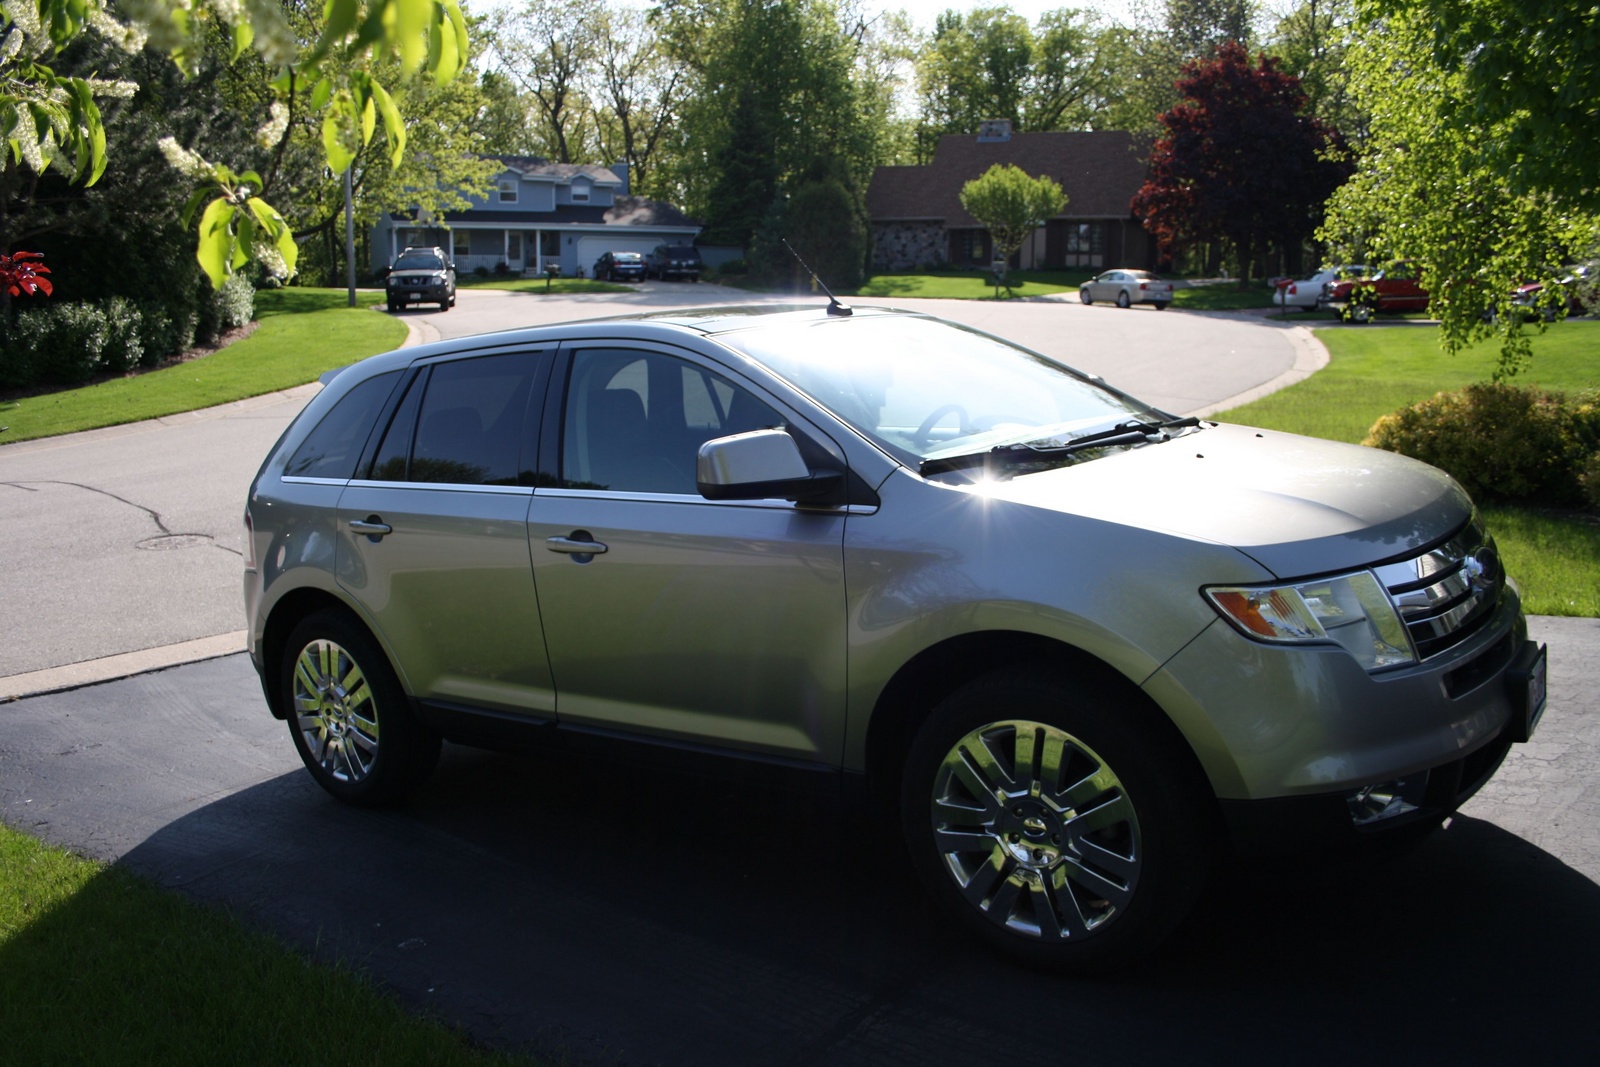 2007 Ford edge towing specs #4